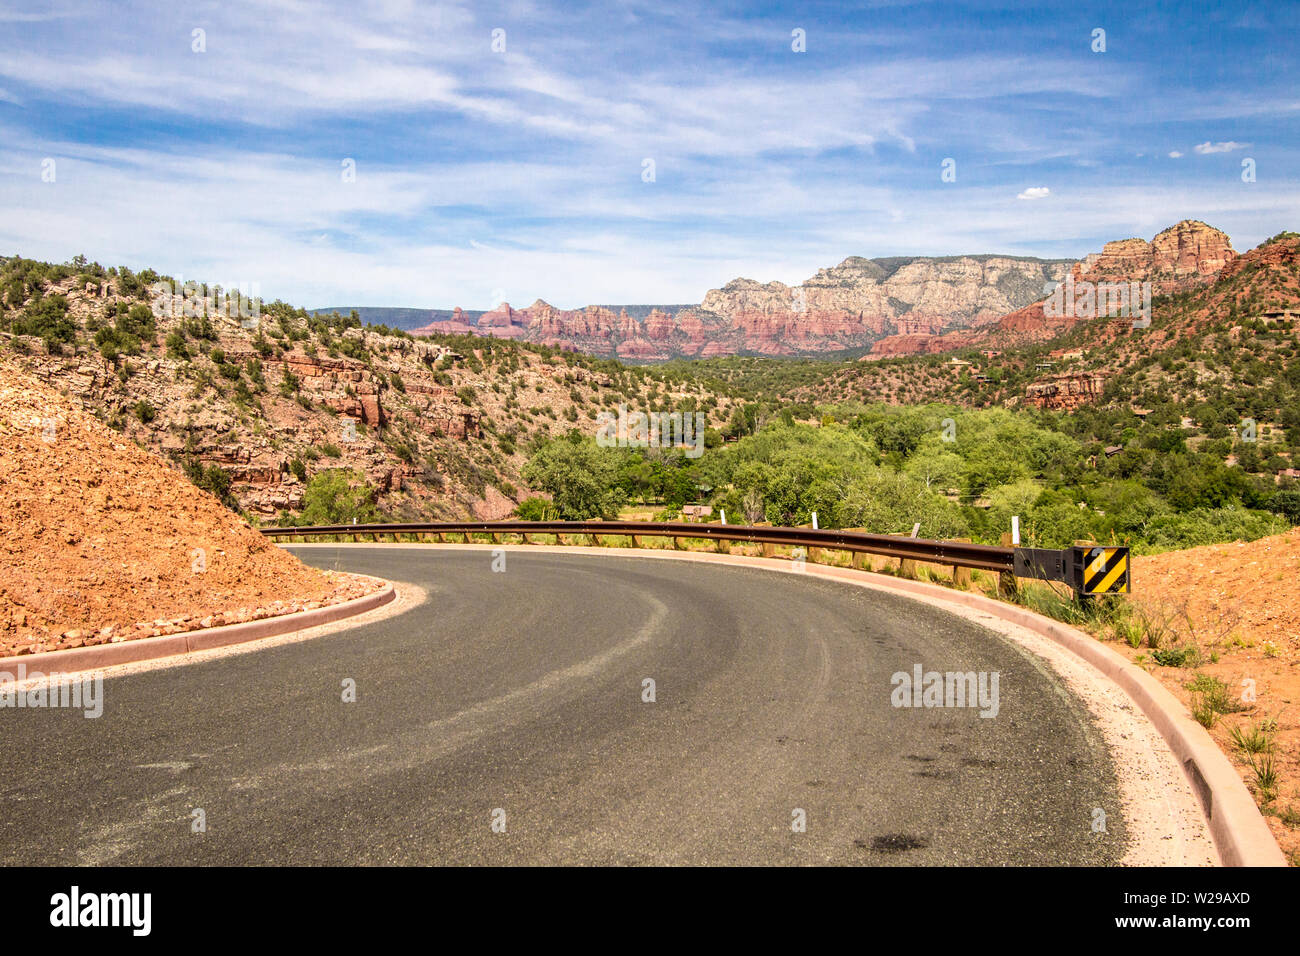 Sedona Arizona. Hairpin curve on winding mountain road through the breathtaking scenery of red rock sandstone mountains and buttes. Stock Photo